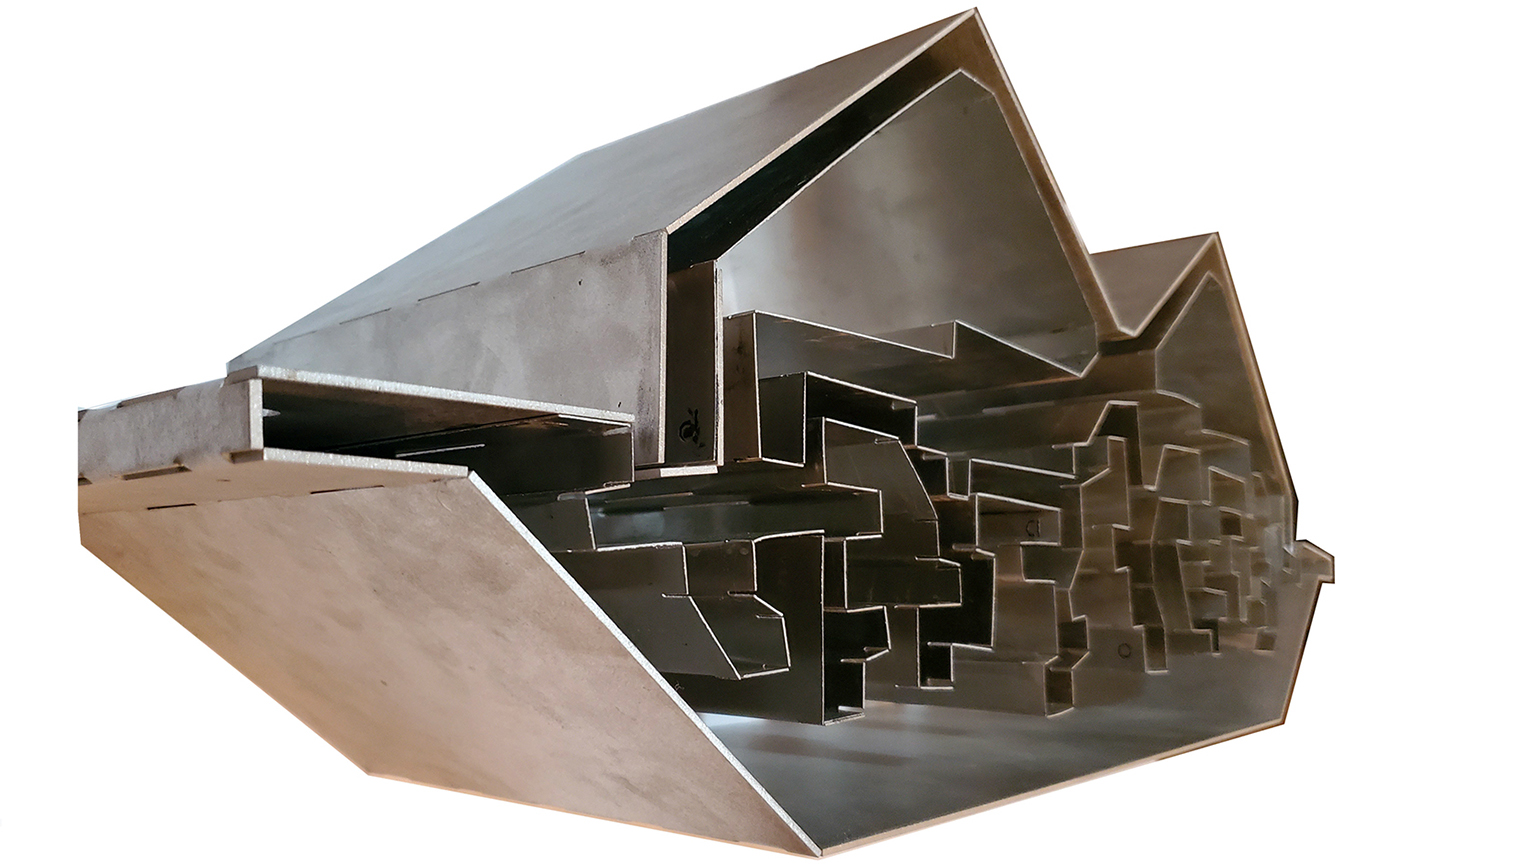 Metal model of a section of a building by Barrett Blaker from the Spring 2020 Core II Studio